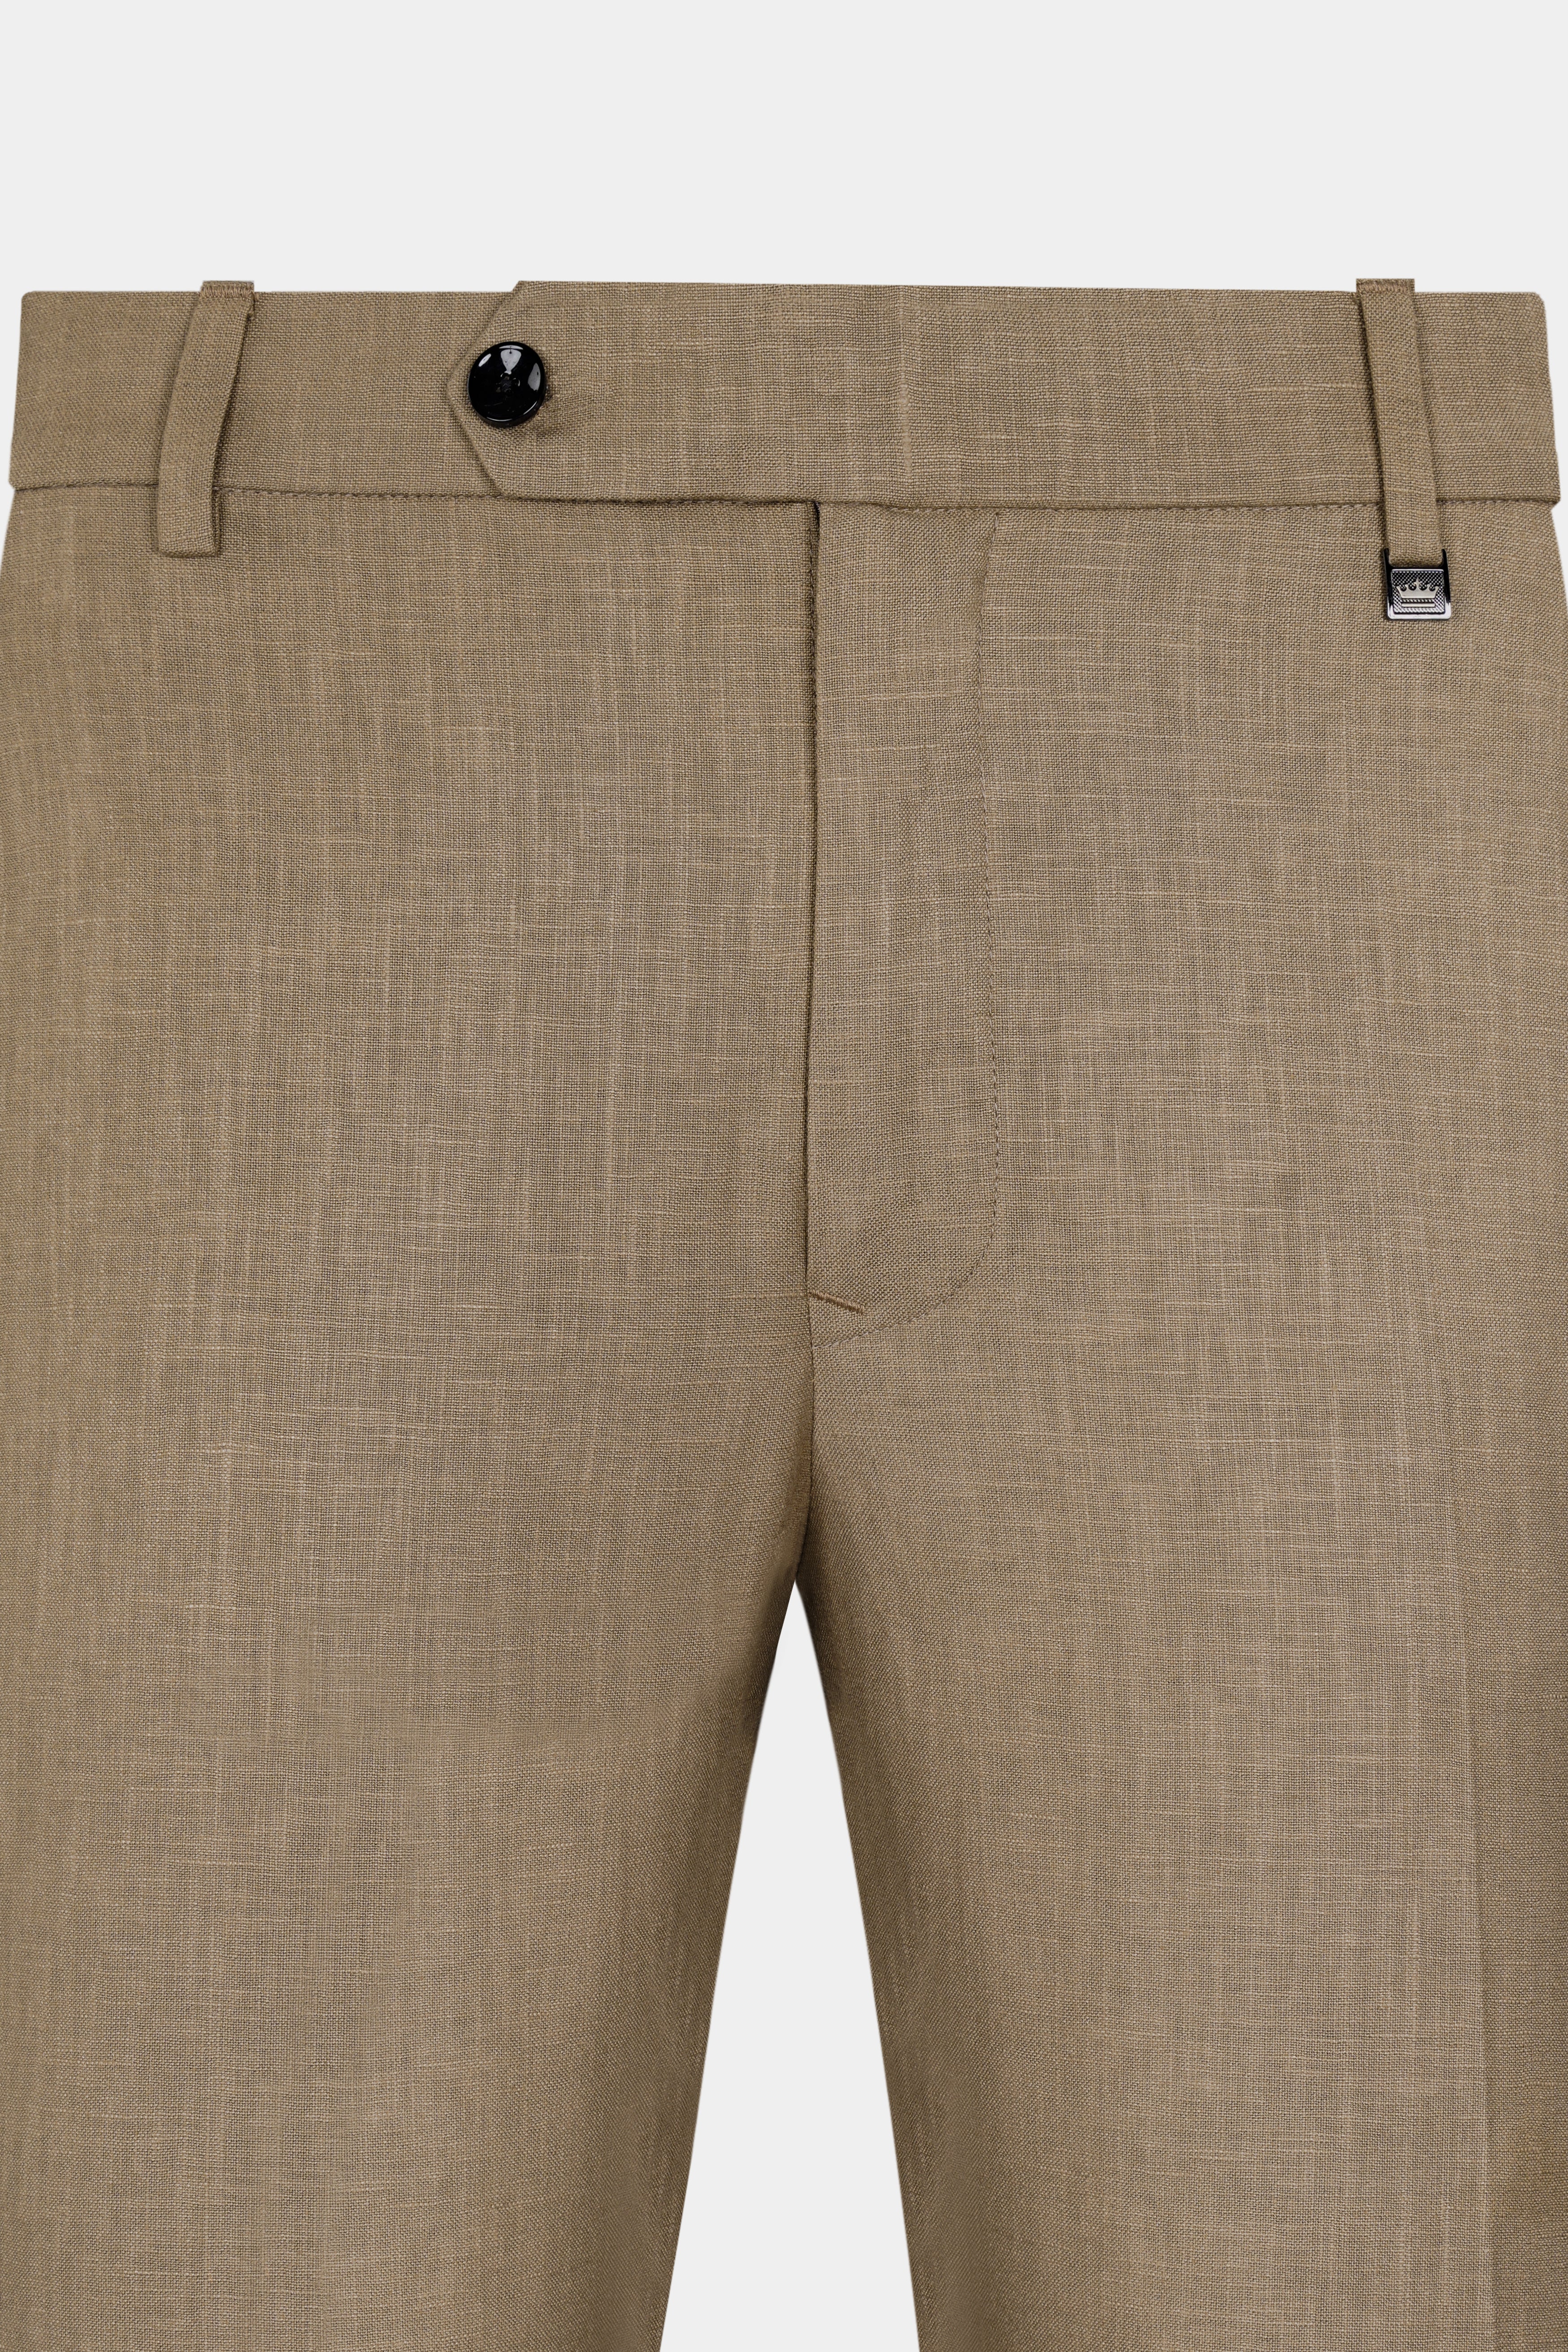 Sandrift Brown Luxurious Linen Double Breasted Sports Suit ST2926-DB-PP-36, ST2926-DB-PP-38, ST2926-DB-PP-40, ST2926-DB-PP-42, ST2926-DB-PP-44, ST2926-DB-PP-46, ST2926-DB-PP-48, ST2926-DB-PP-50, ST2926-DB-PP-52, ST2926-DB-PP-54, ST2926-DB-PP-56, ST2926-DB-PP-58, ST2926-DB-PP-60